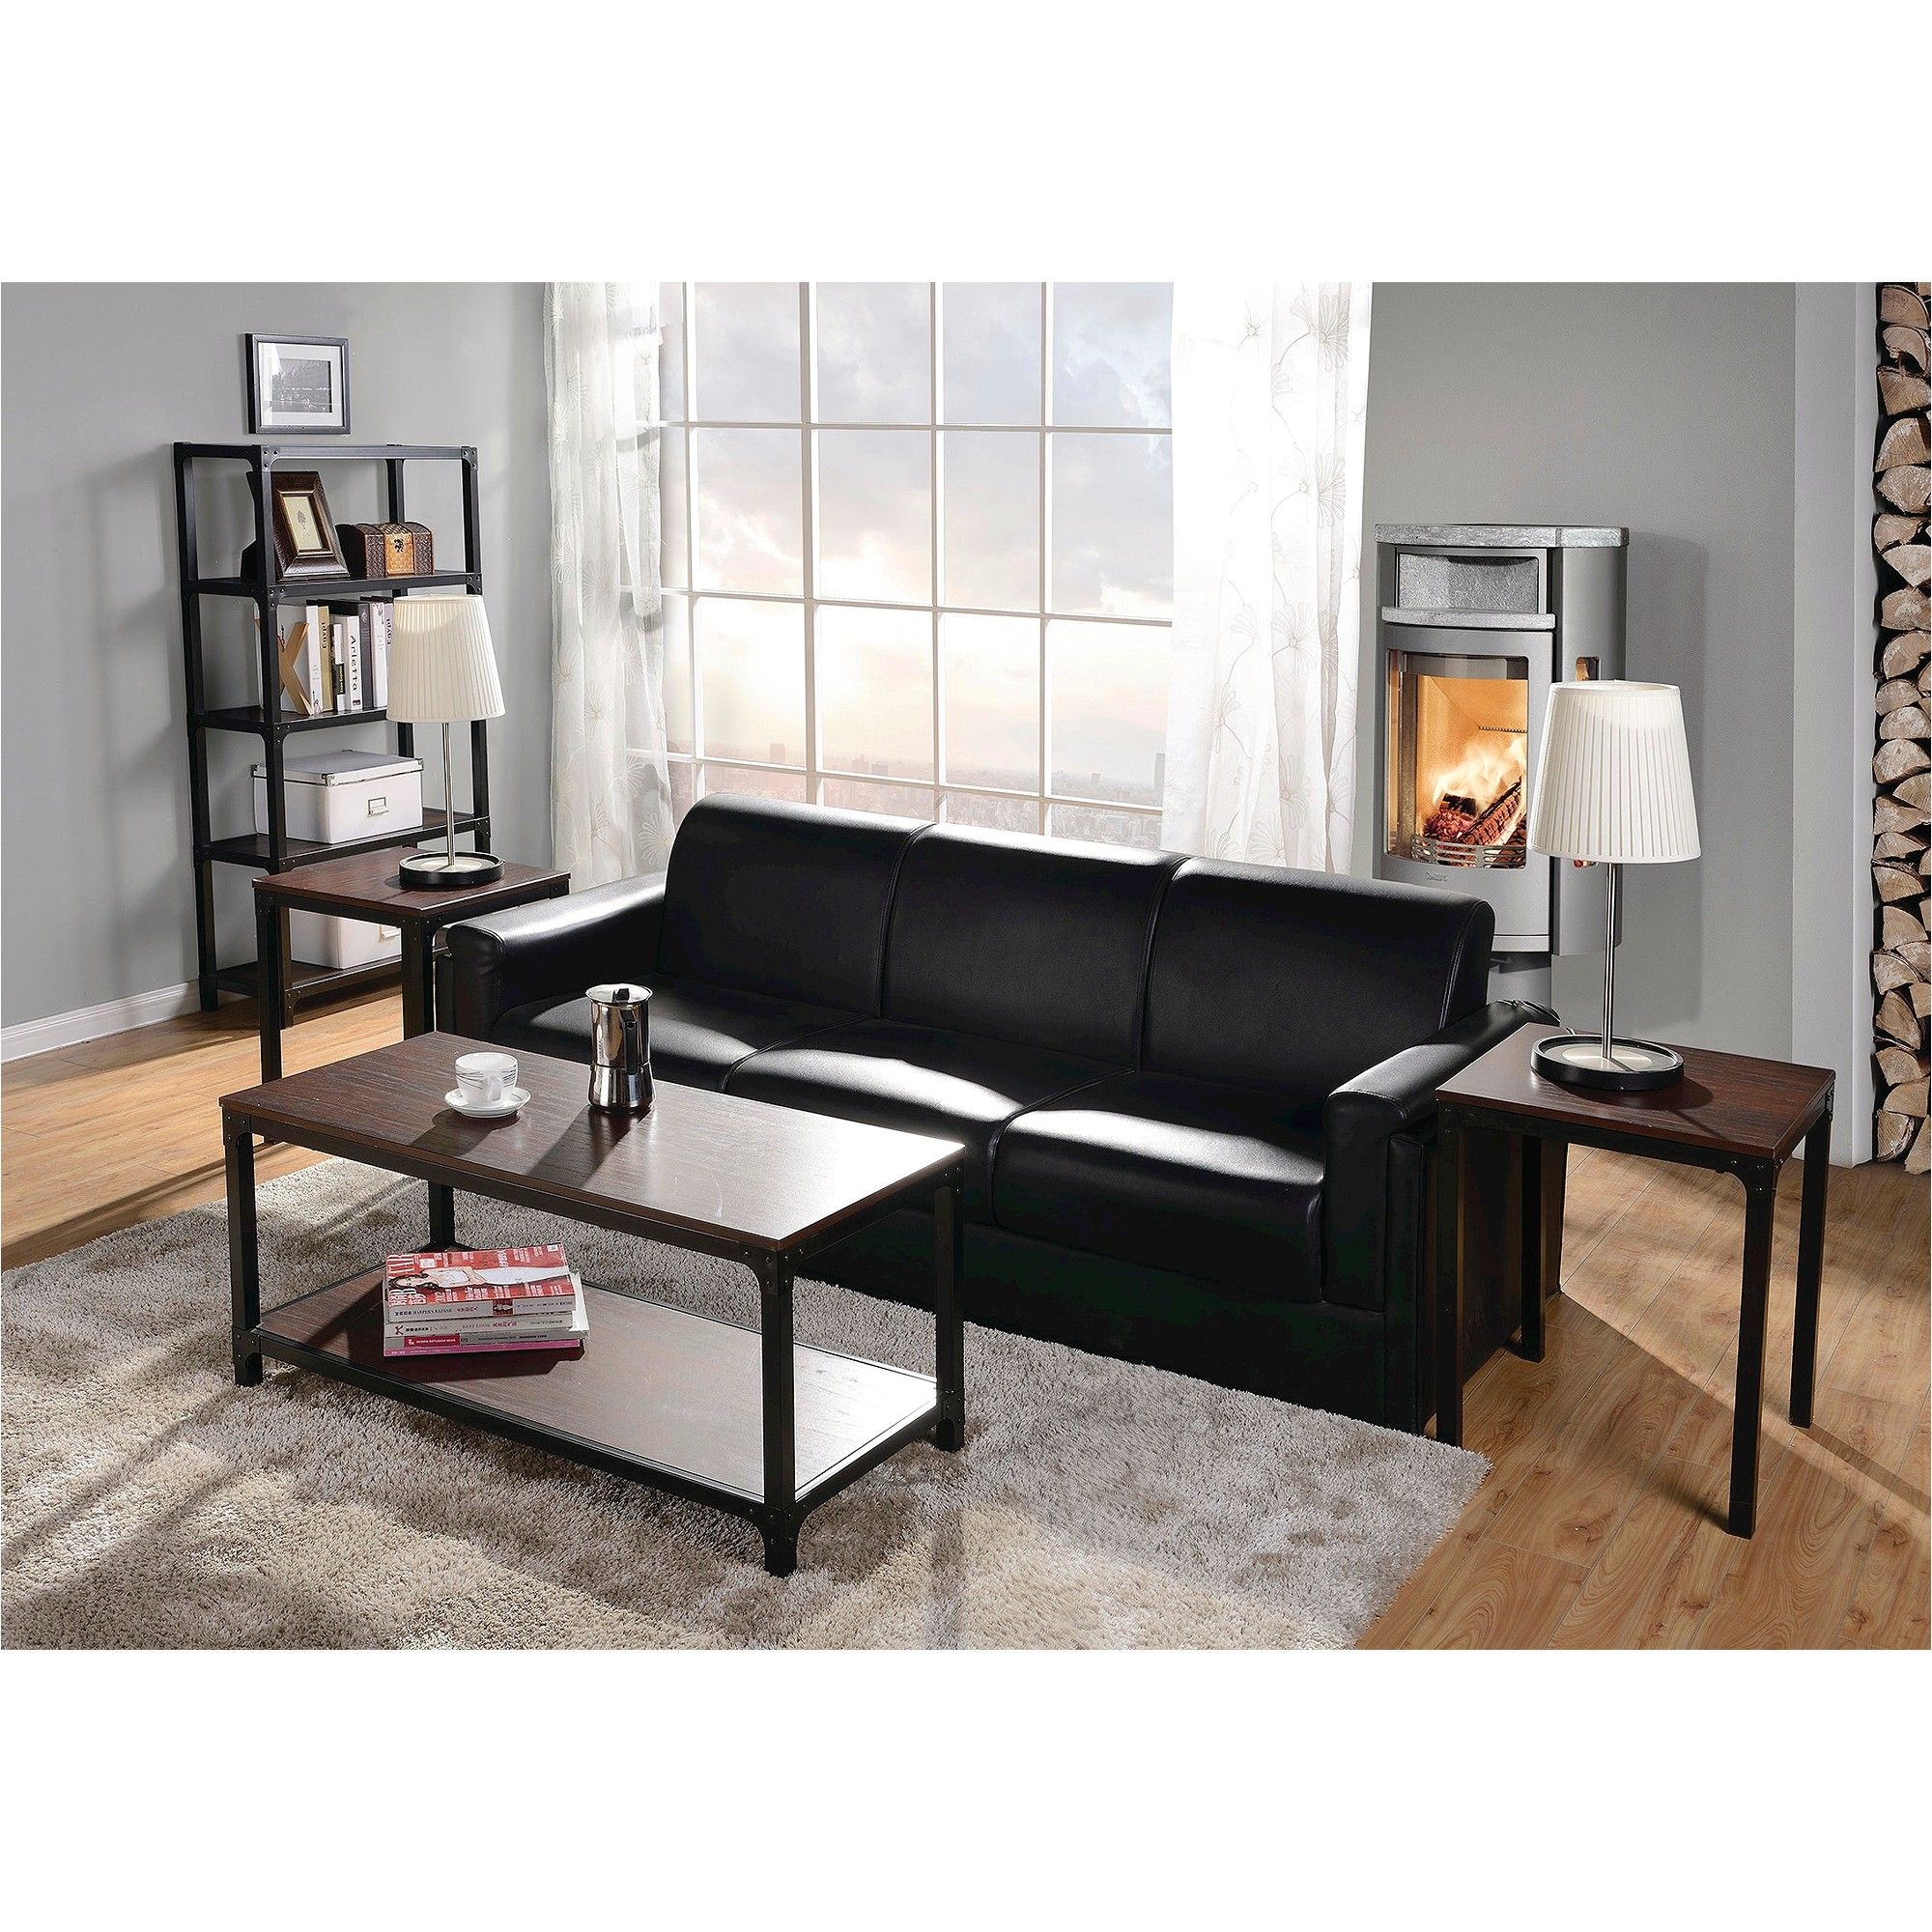 3 Piece Coffee Table & Side Table Set Homestar Red Black